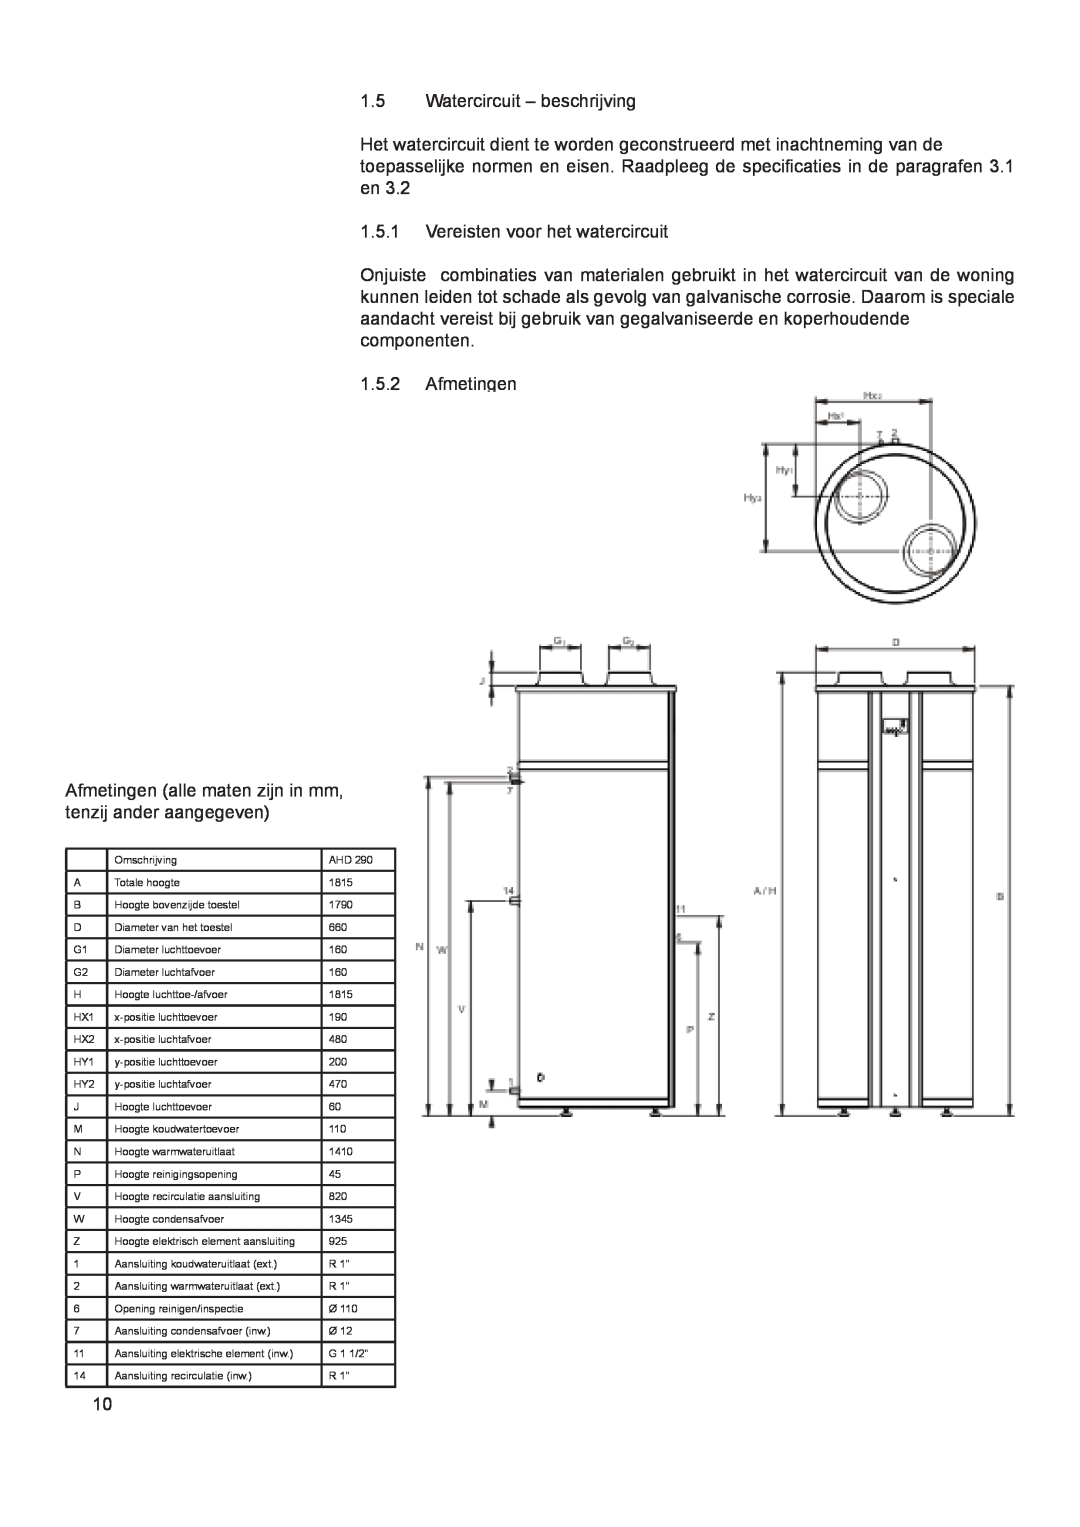 A.O. Smith 290 service manual 1.5Watercircuit – beschrijving 